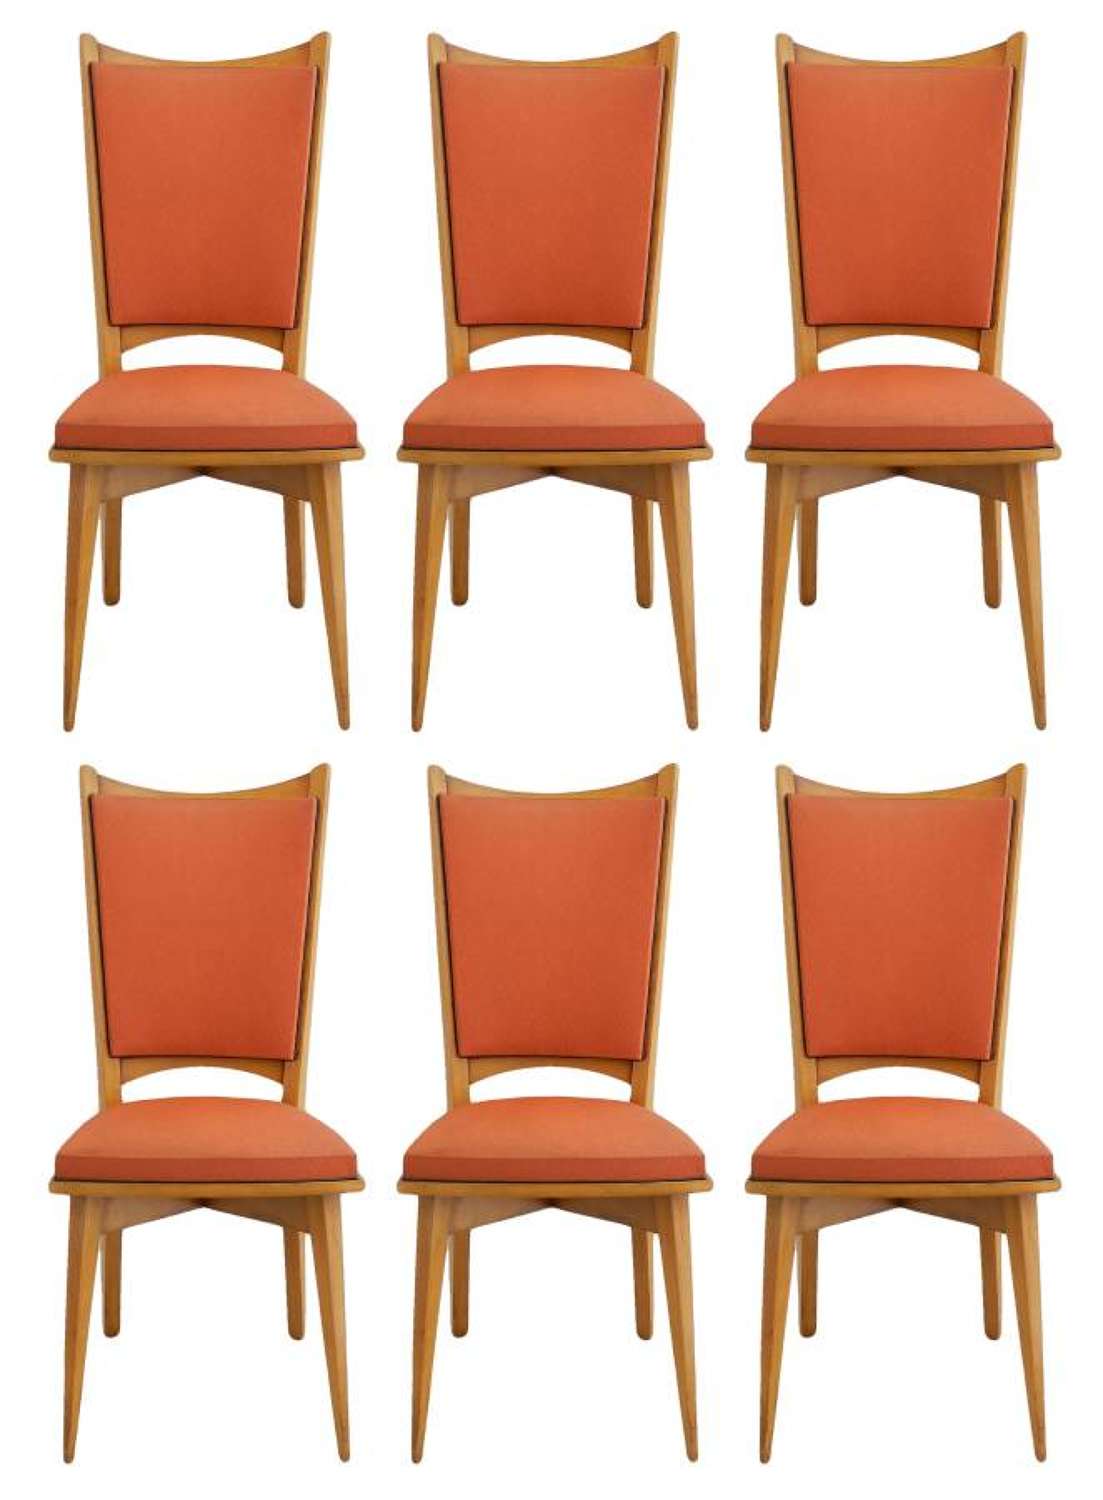 Six Mid Century French Dining Chairs all original in good condition